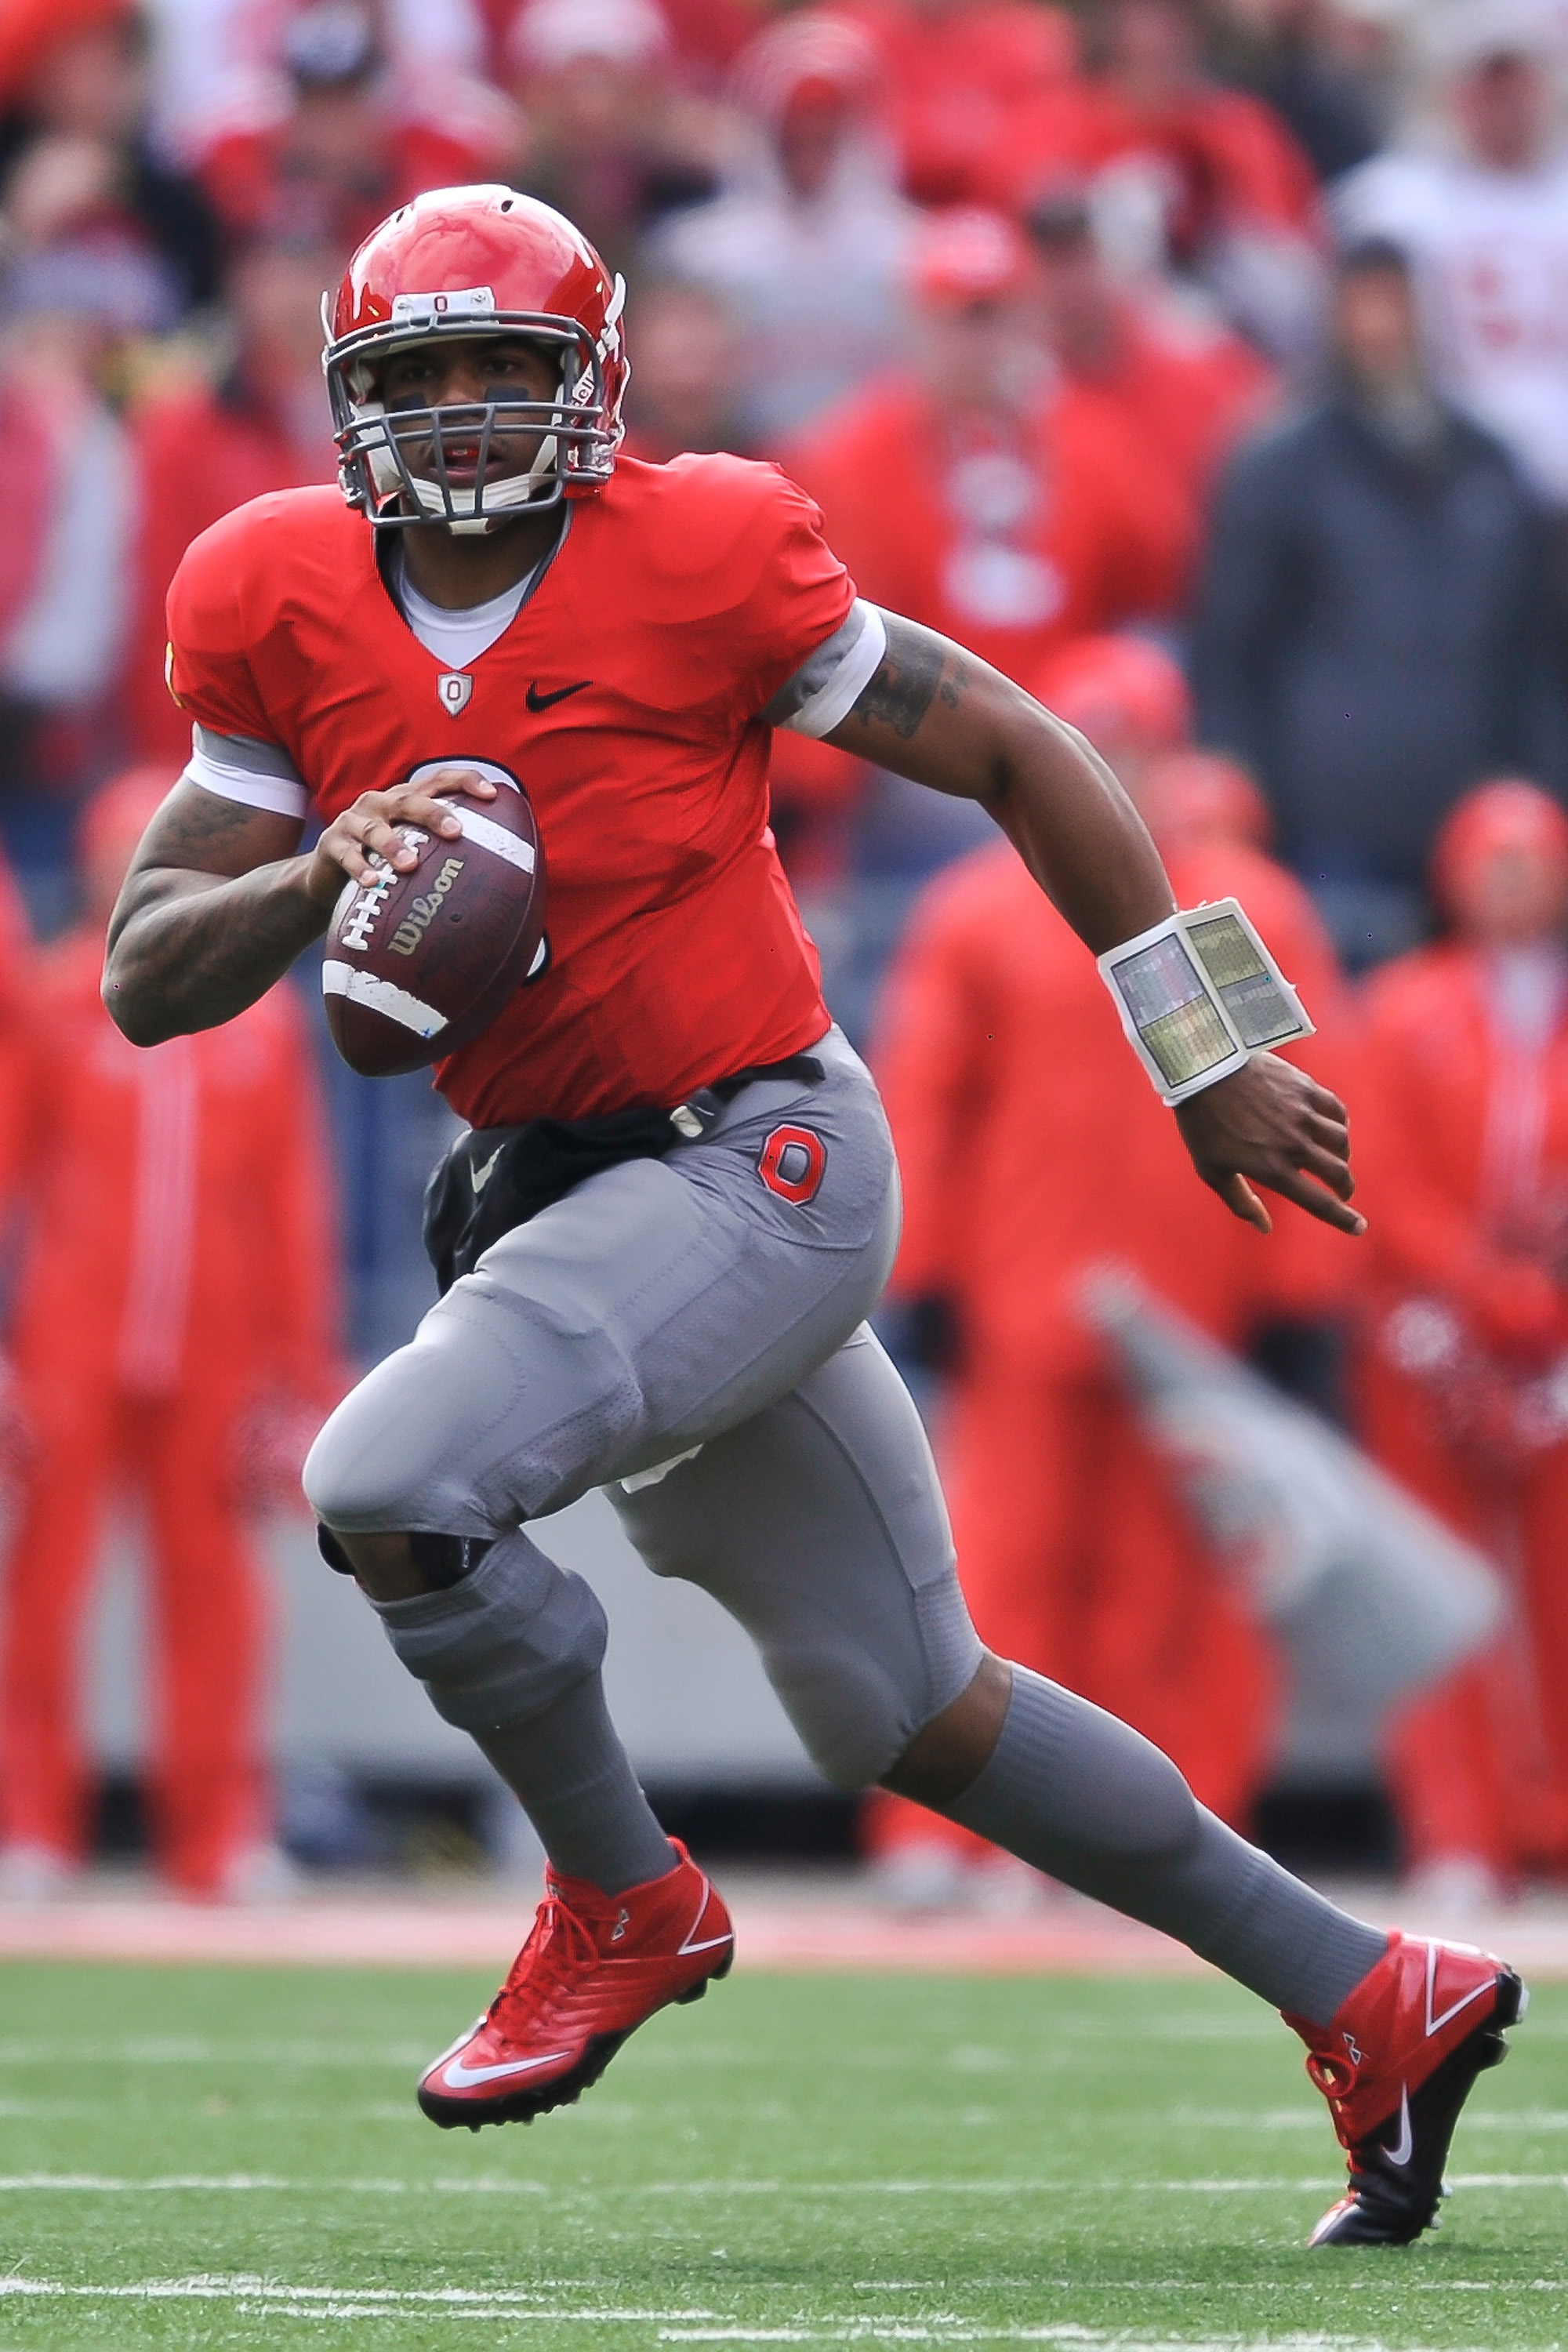 COLUMBUS, OH - NOVEMBER 27:  Quarterback Terrelle Pryor #2 of the Ohio State Buckeyes rolls out of the pocket against the Michigan Wolverines at Ohio Stadium on November 27, 2010 in Columbus, Ohio.  (Photo by Jamie Sabau/Getty Images)